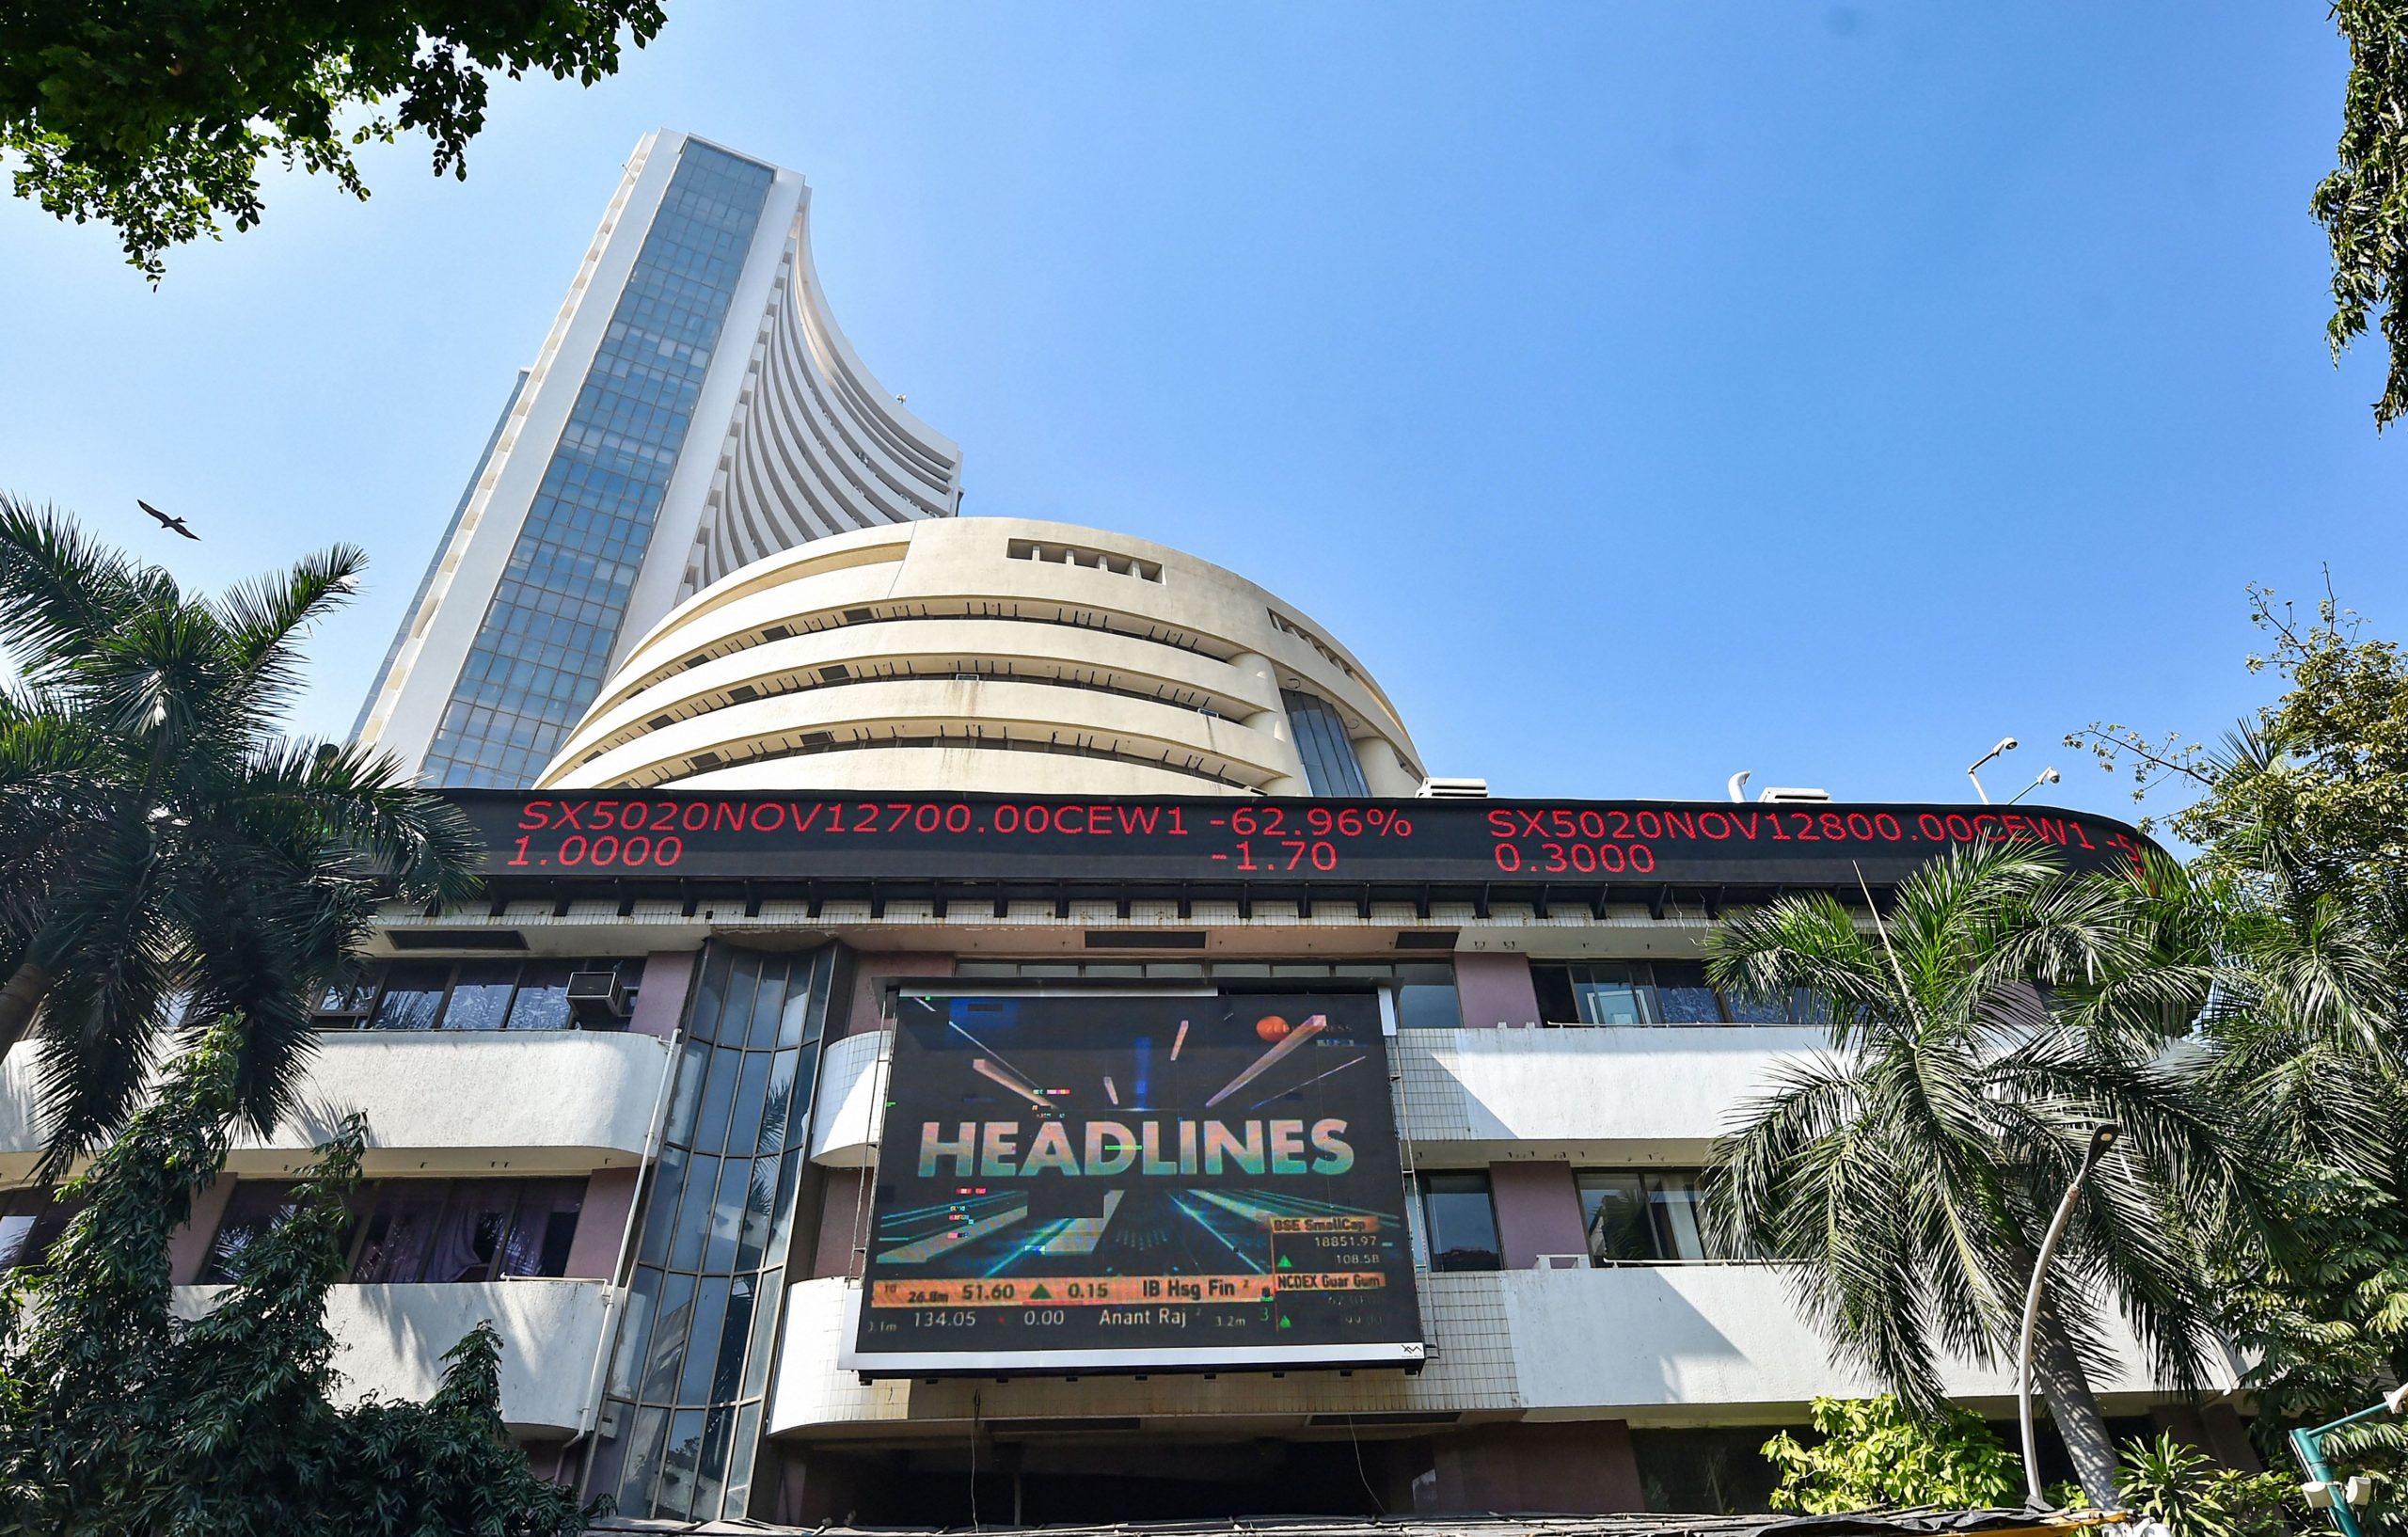 Trending Stocks:  RIL, Infosys, TCS, HFCL and others in news today